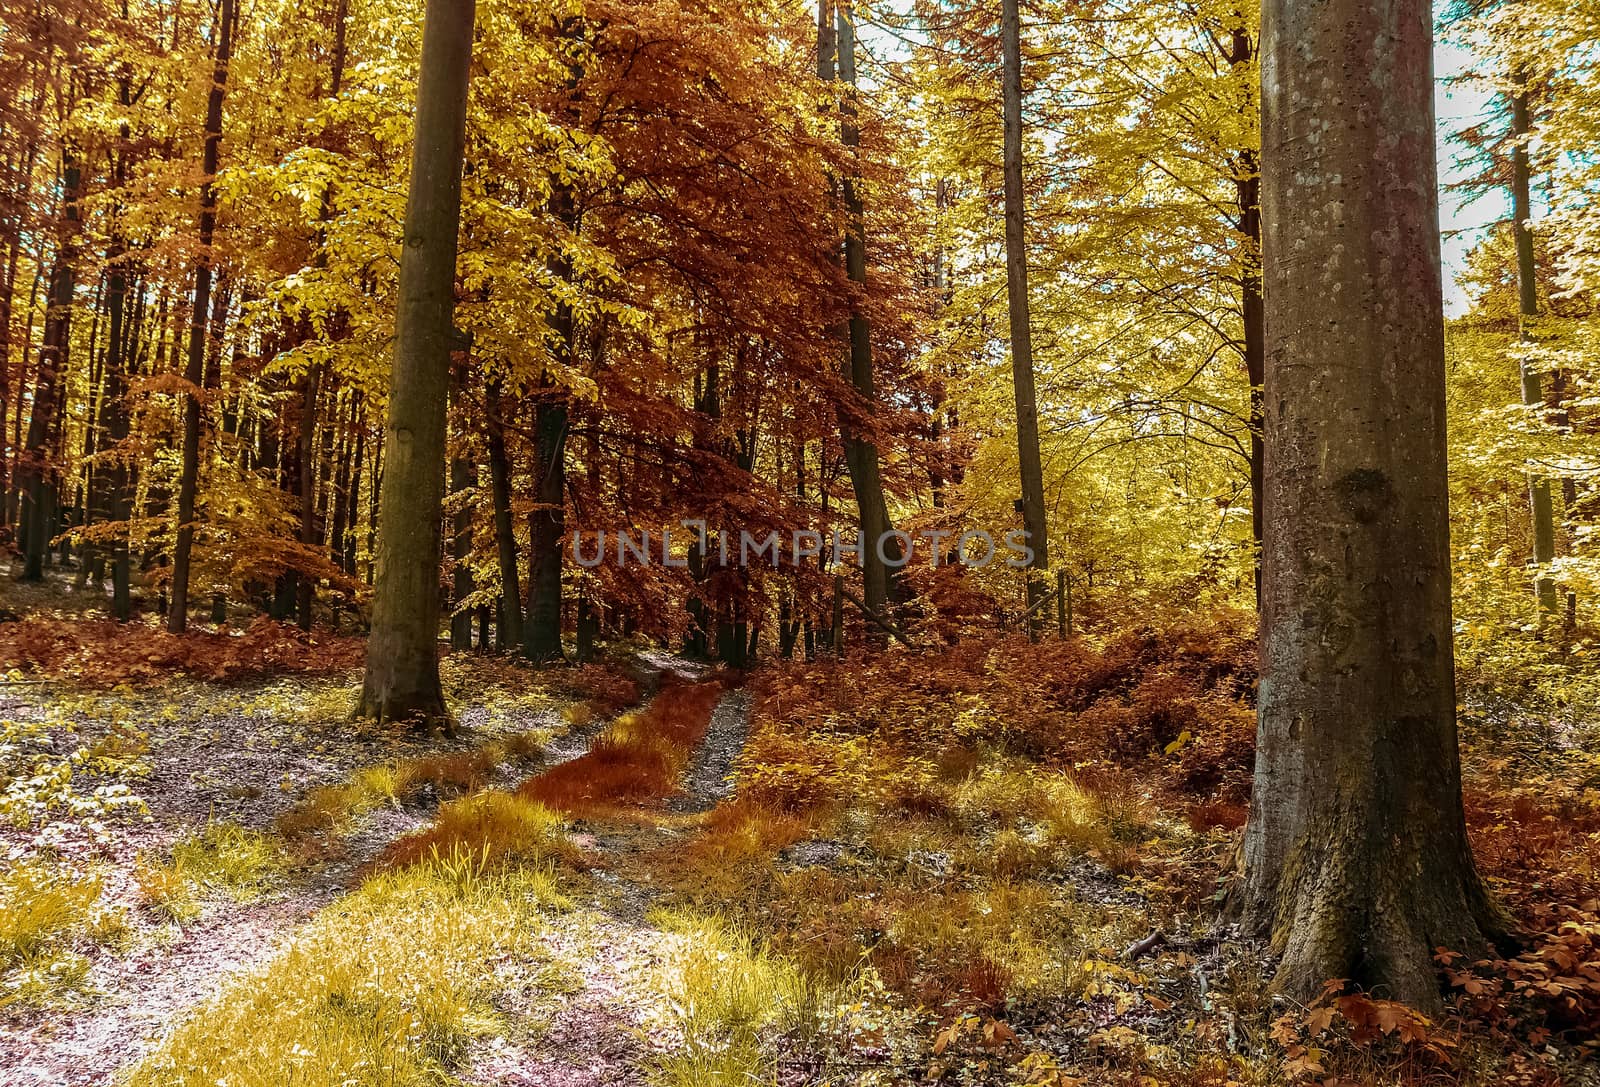 Beautiful panorama view on a golden autumn landscape found in eu by MP_foto71